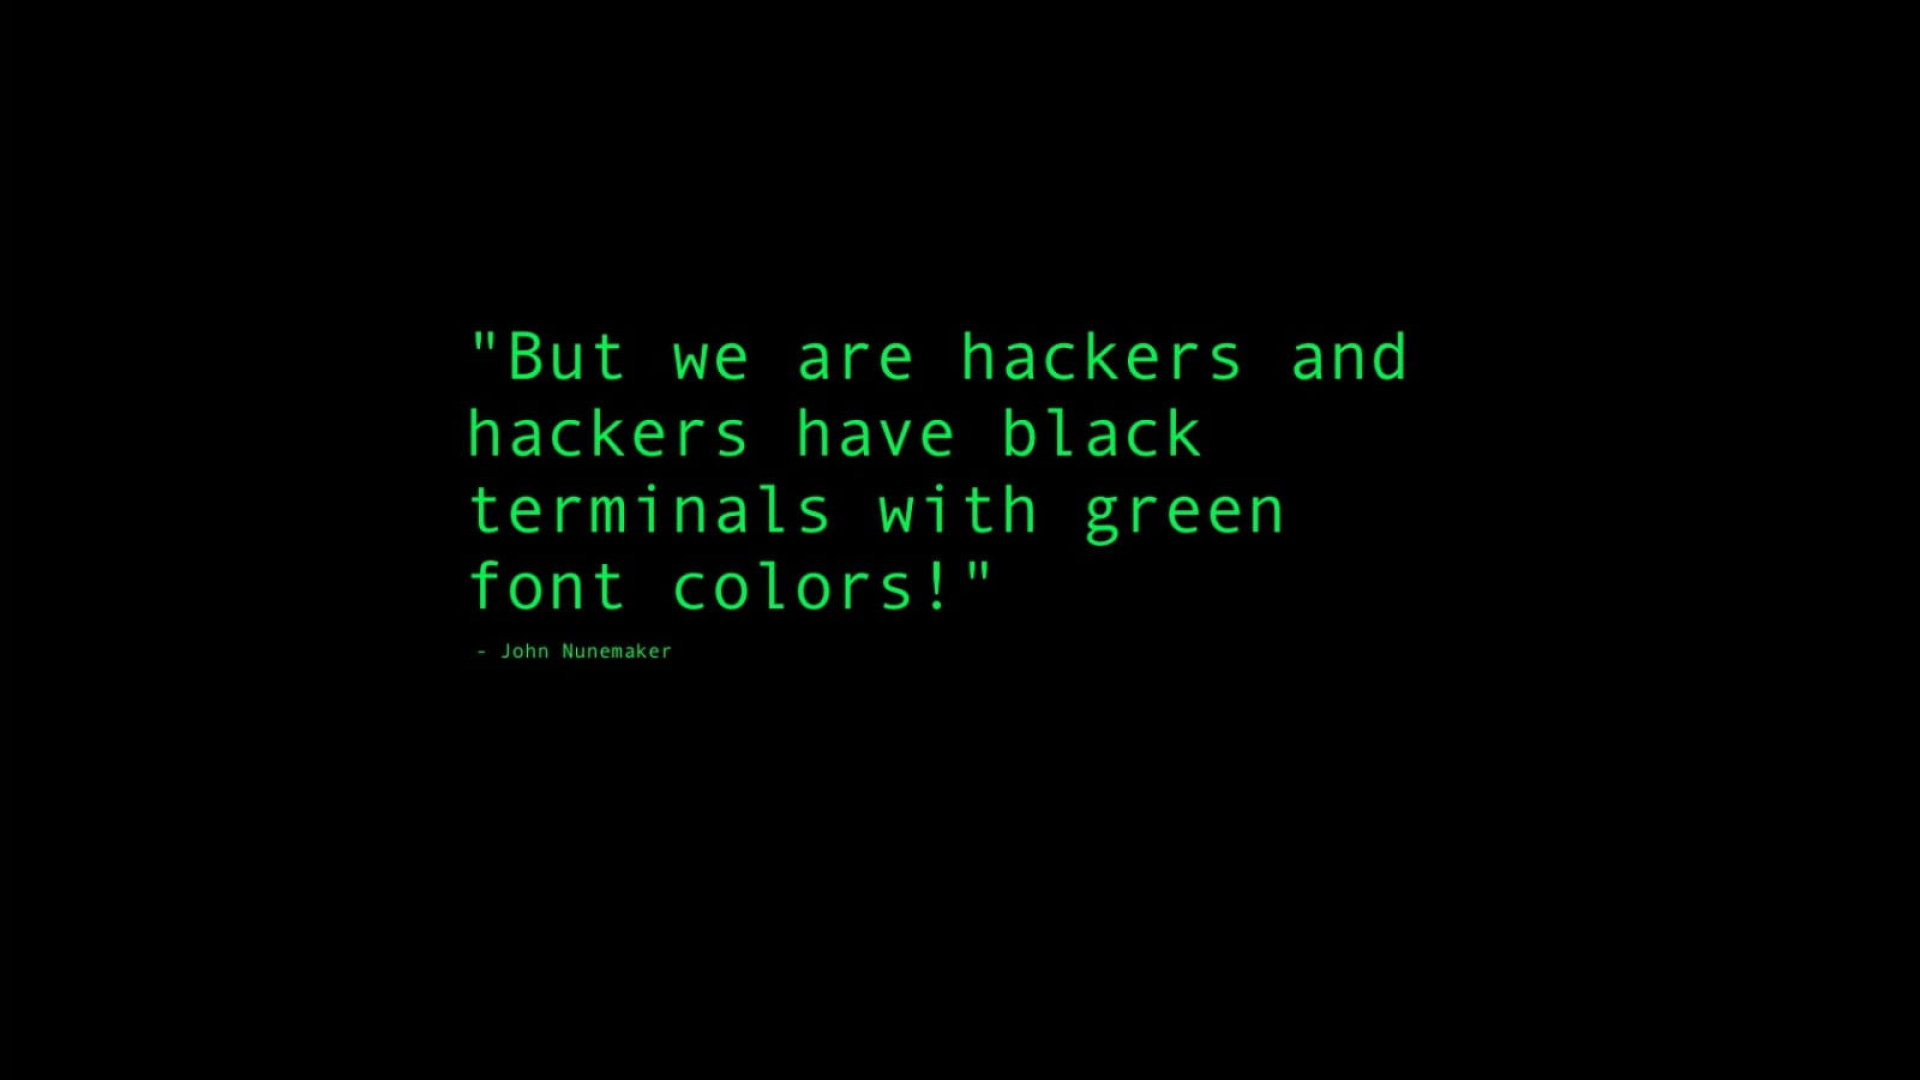 Green but we are hackers wallpaper, quote, hacking, humor • Wallpaper For You HD Wallpaper For Desktop & Mobile